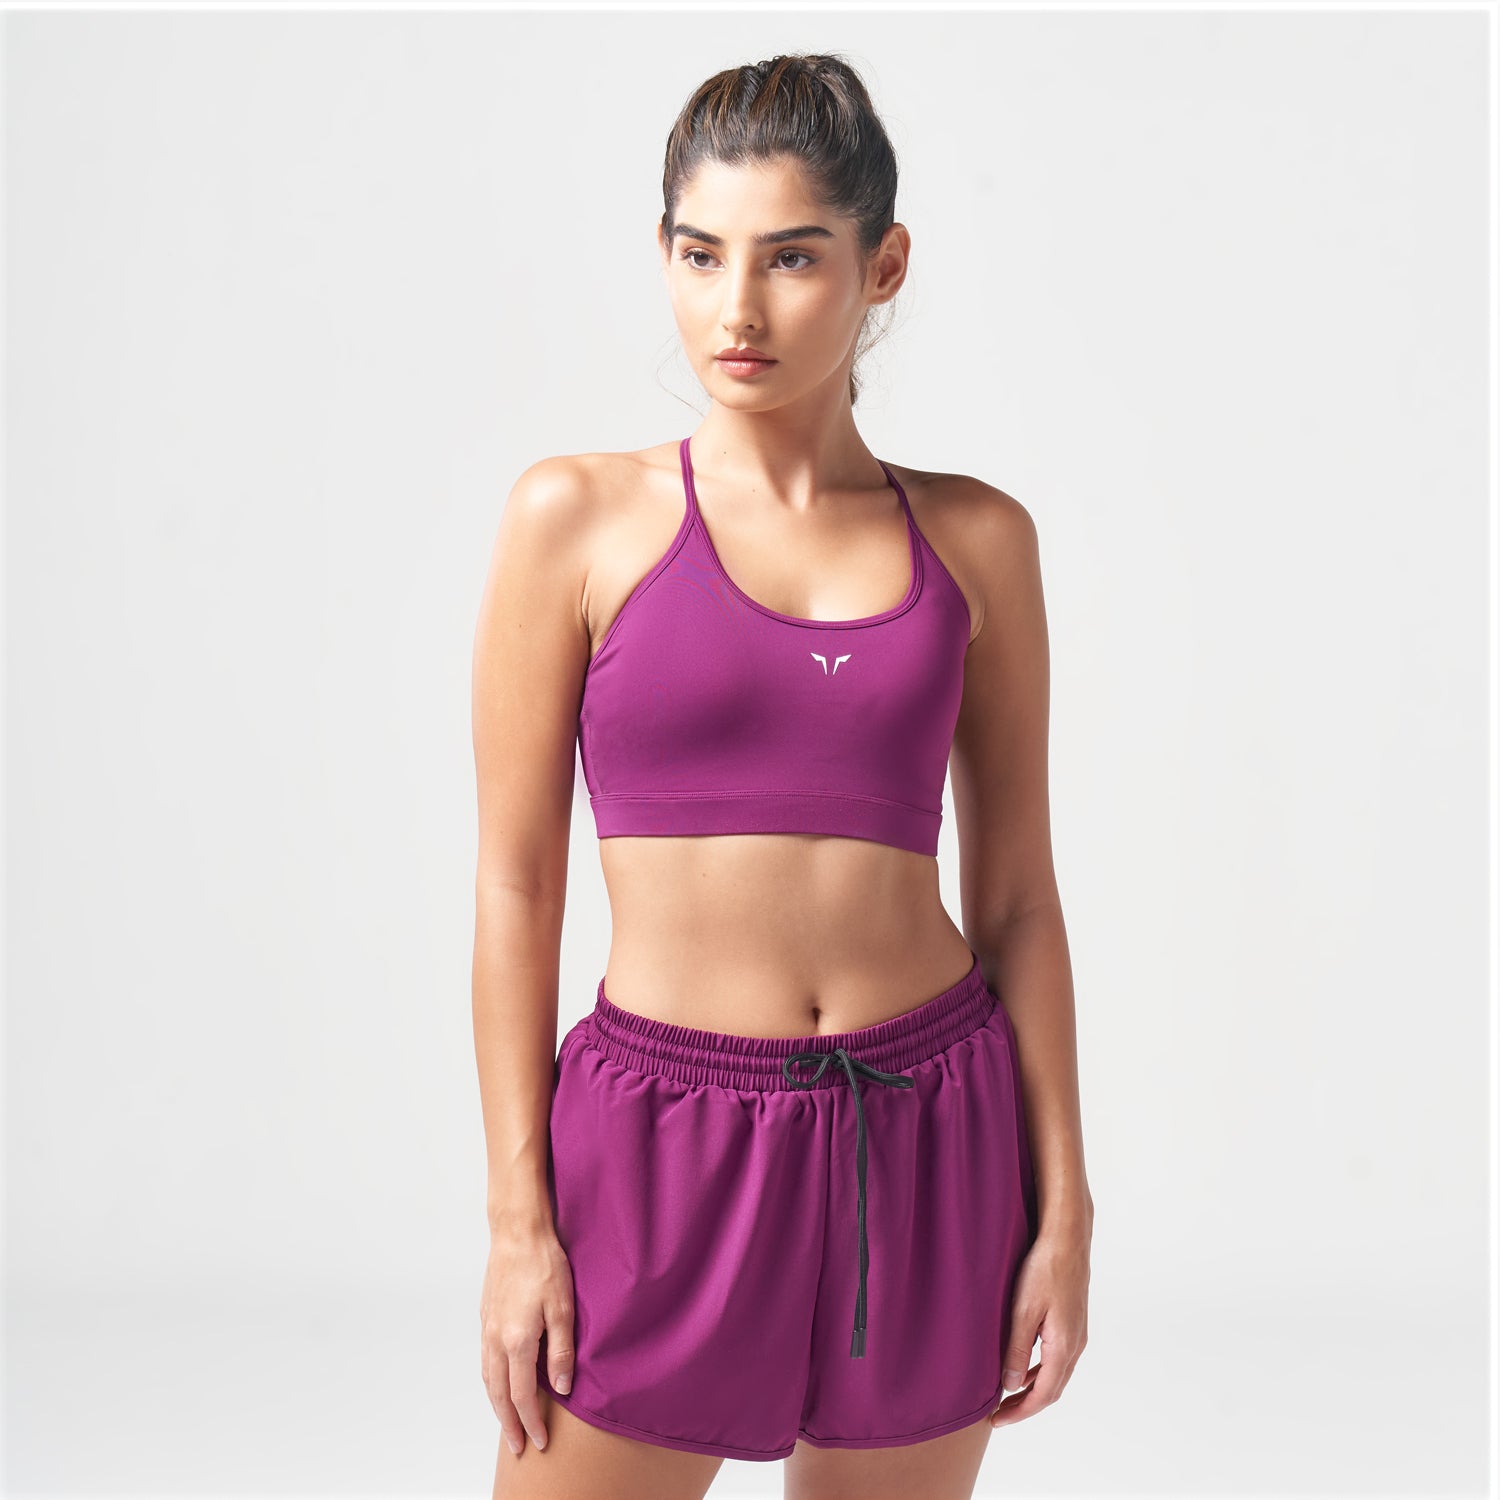 squatwolf-workout-clothes-essential-low-impact-bra-purple-sports-bra-for-gym